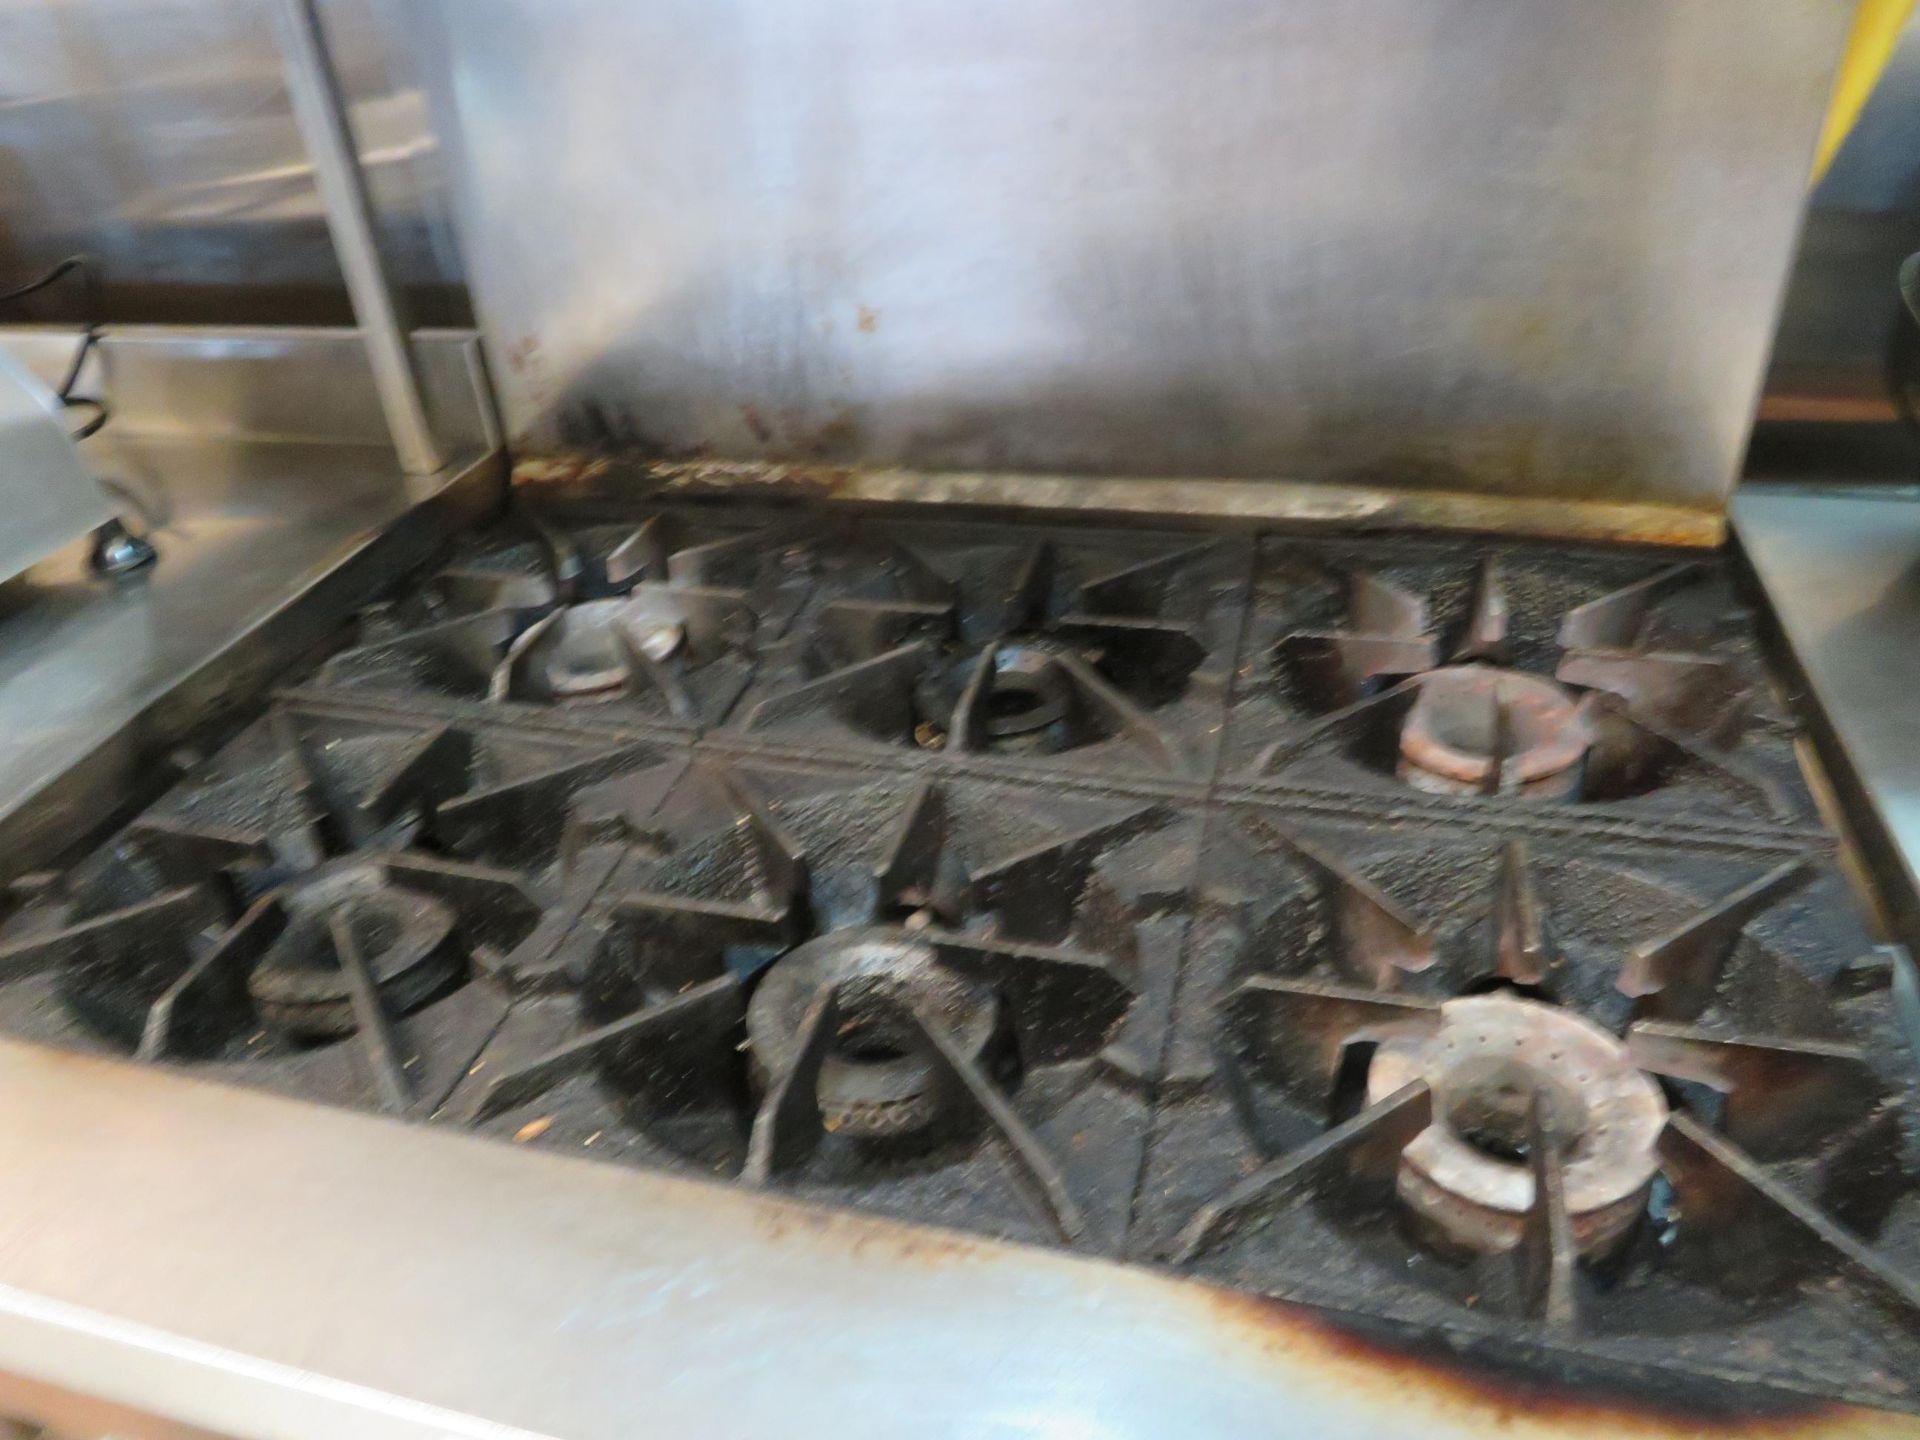 ROYAL 6 burner oven approx. 36"w x 32"d x 36"h - Image 3 of 3